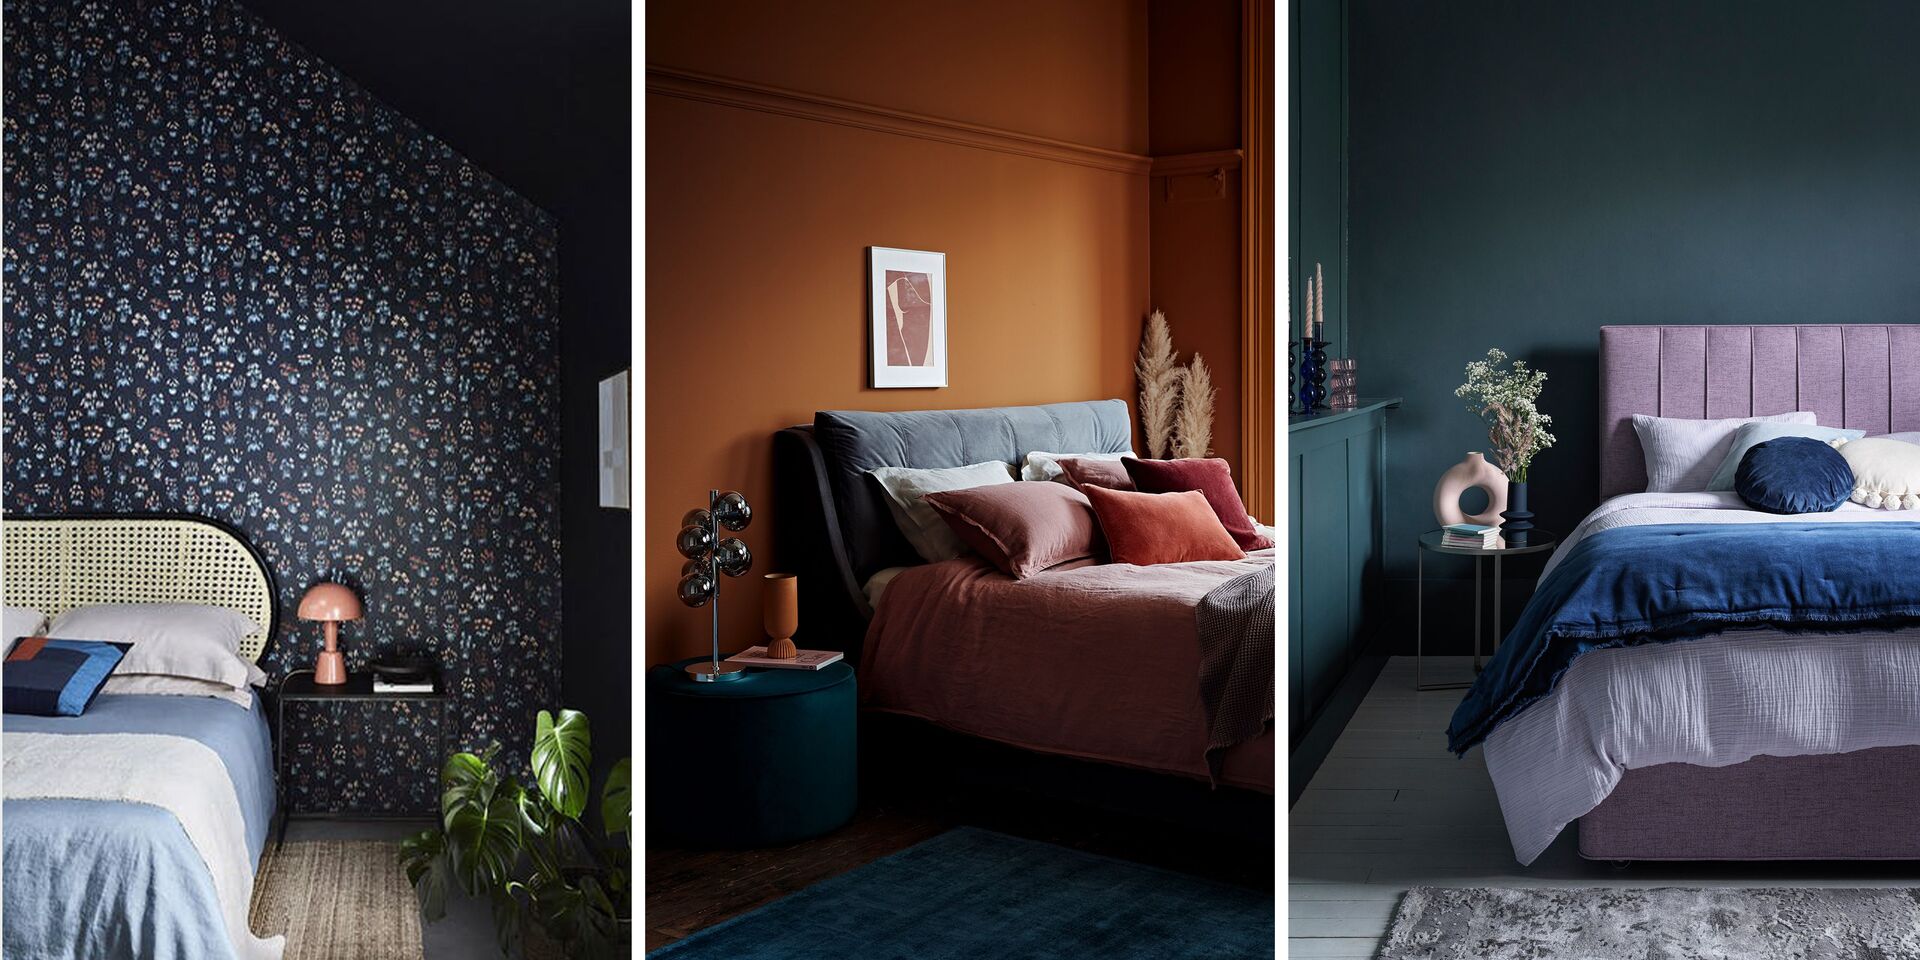 How To Make A Bedroom Darker – 8 Ways To Invite The Dark Side Into Your Boudoir